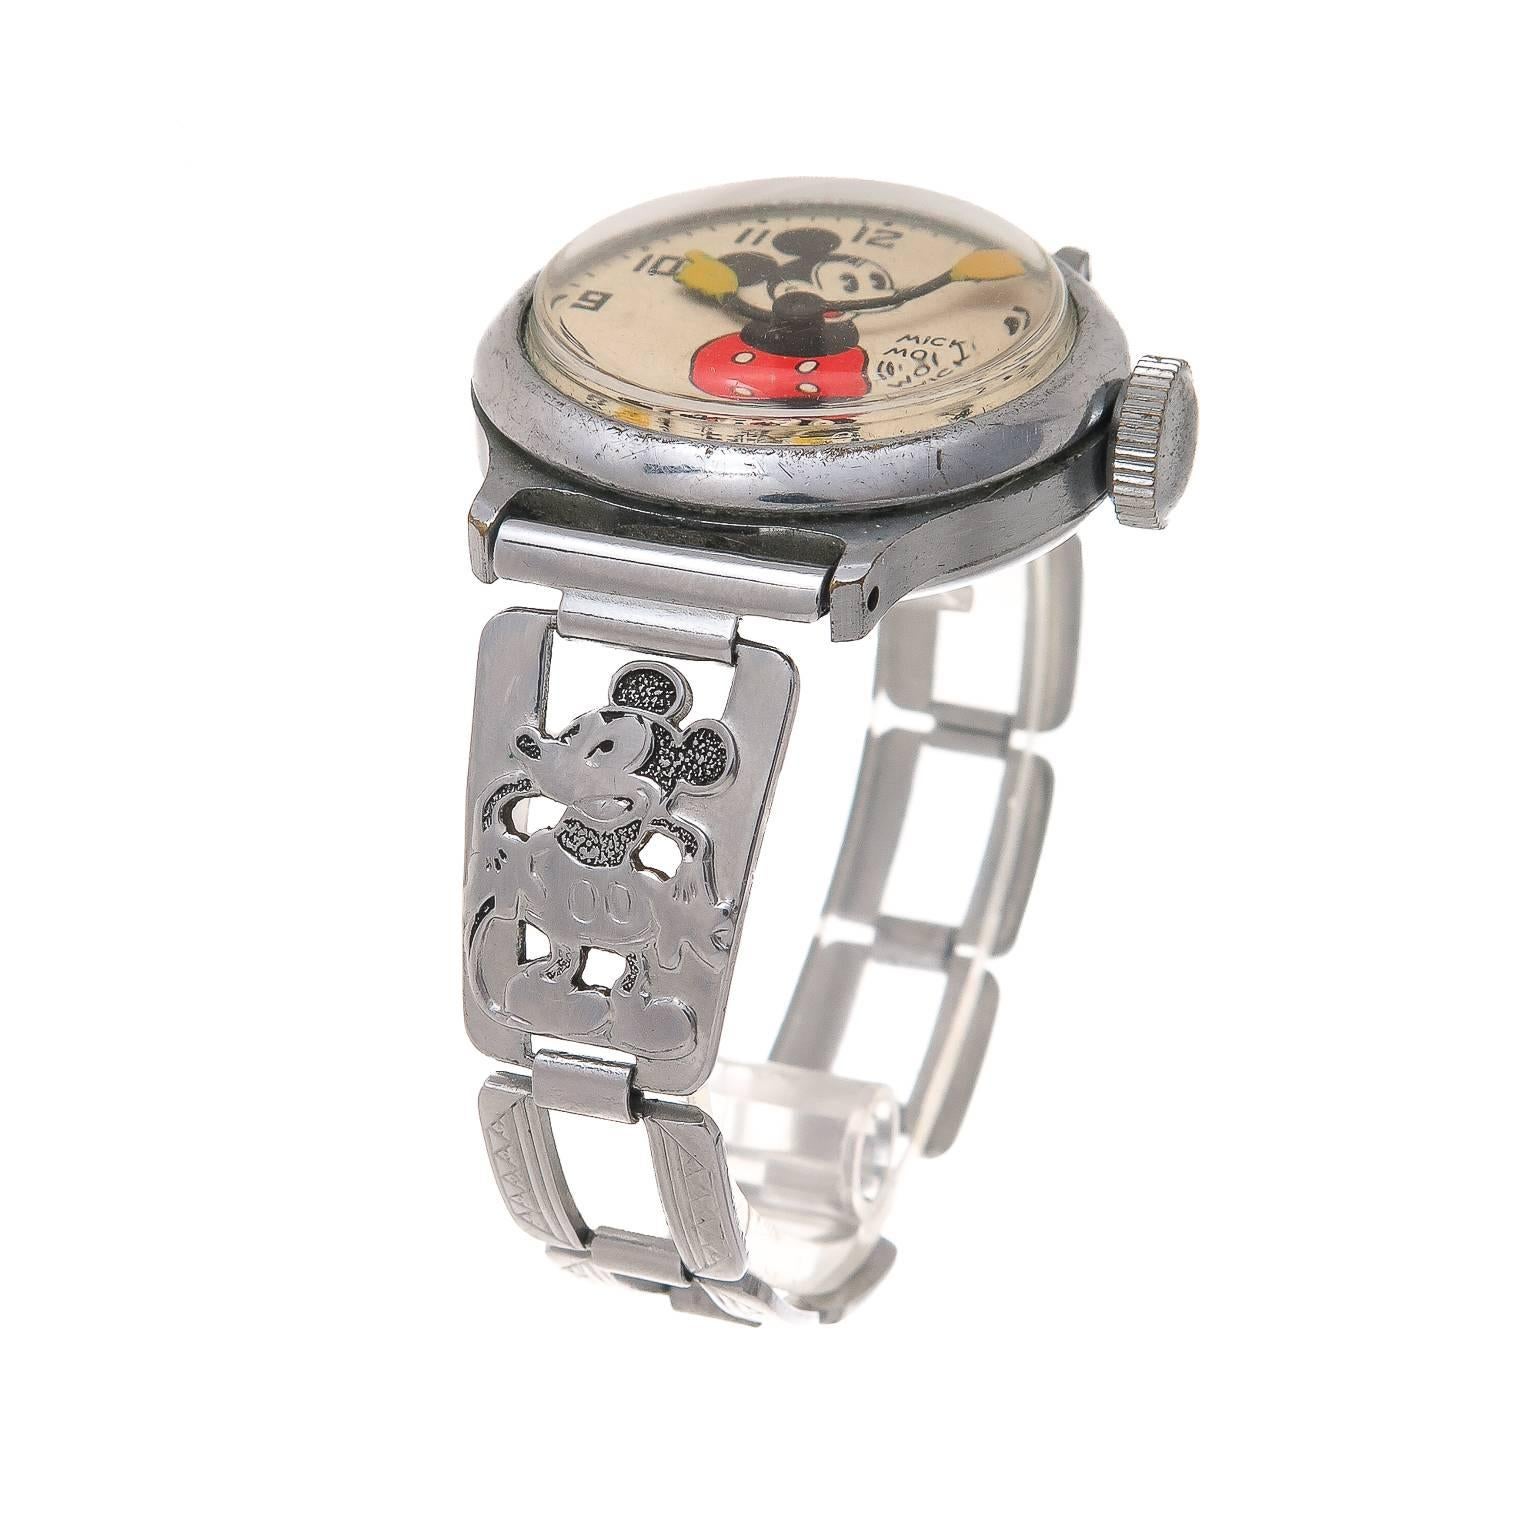 Circa 1933 Ingersoll Mickey Mouse Wrist Watch, This watch belonged to American Artist and Sculptor Ernest Trova ( 1927-2009 ) I had the pleasure of knowing Mr. Trova in the Early 1990s, we shared the same interest in vintage Disney Character